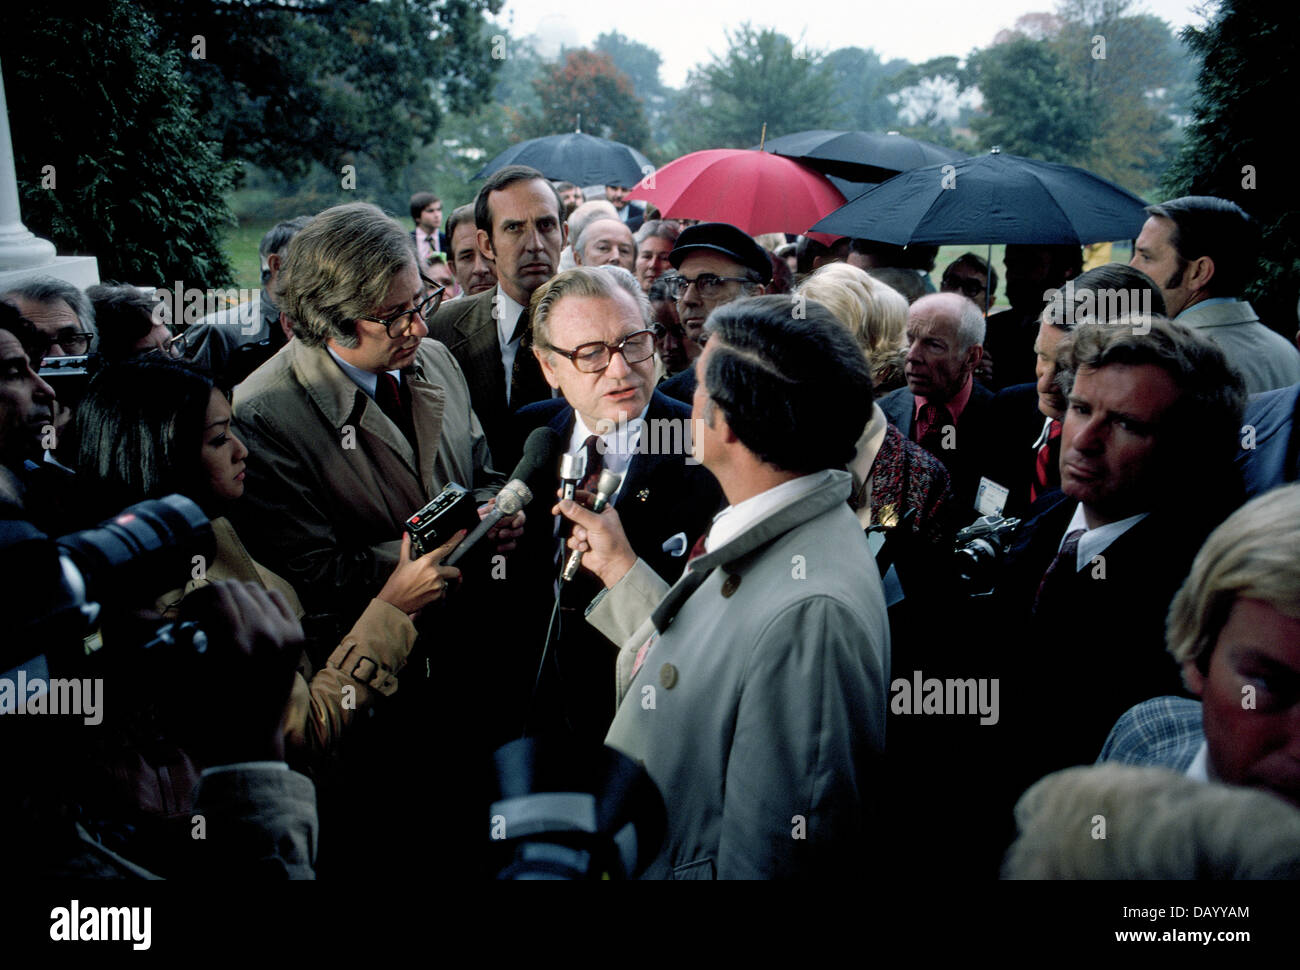 The press interviews Nelson A. Rockefeller in 1976 in Washington, D.C., USA, during his term as the 41st Vice President of the United States(1974-77). Stock Photo